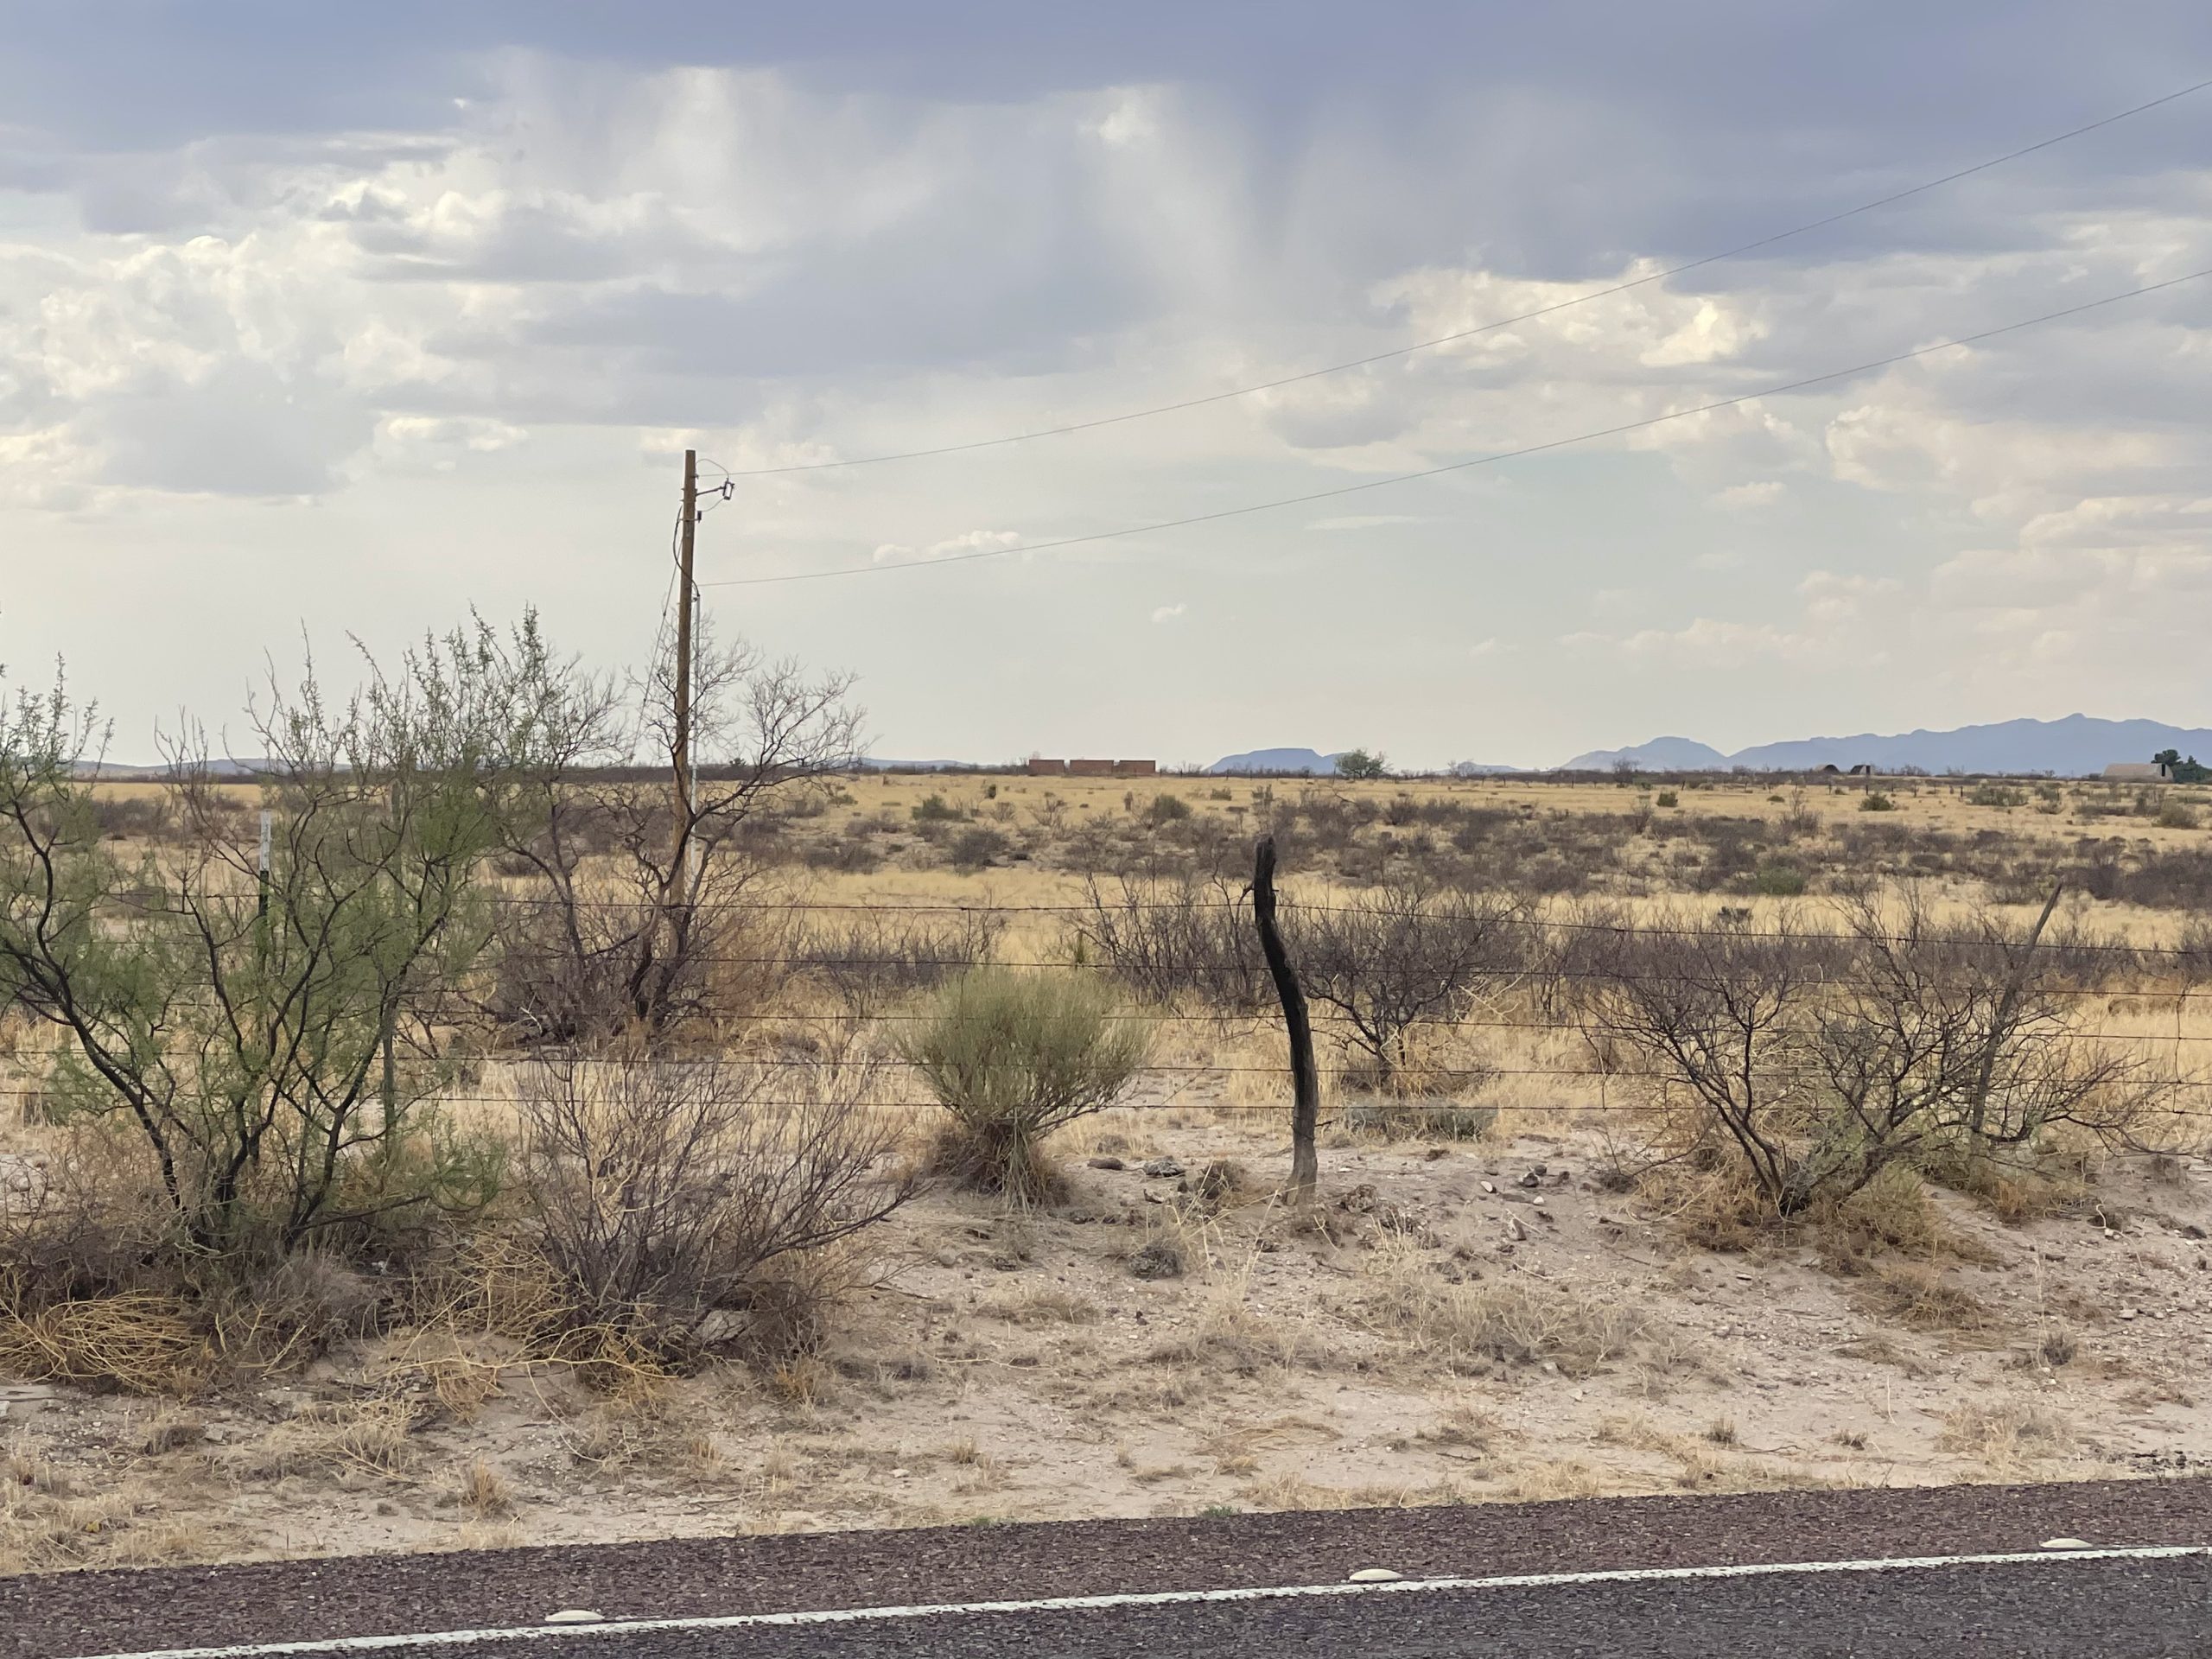 View of a desert landscape with a strip of road in the foreground and a brick wall just visible on the horizon